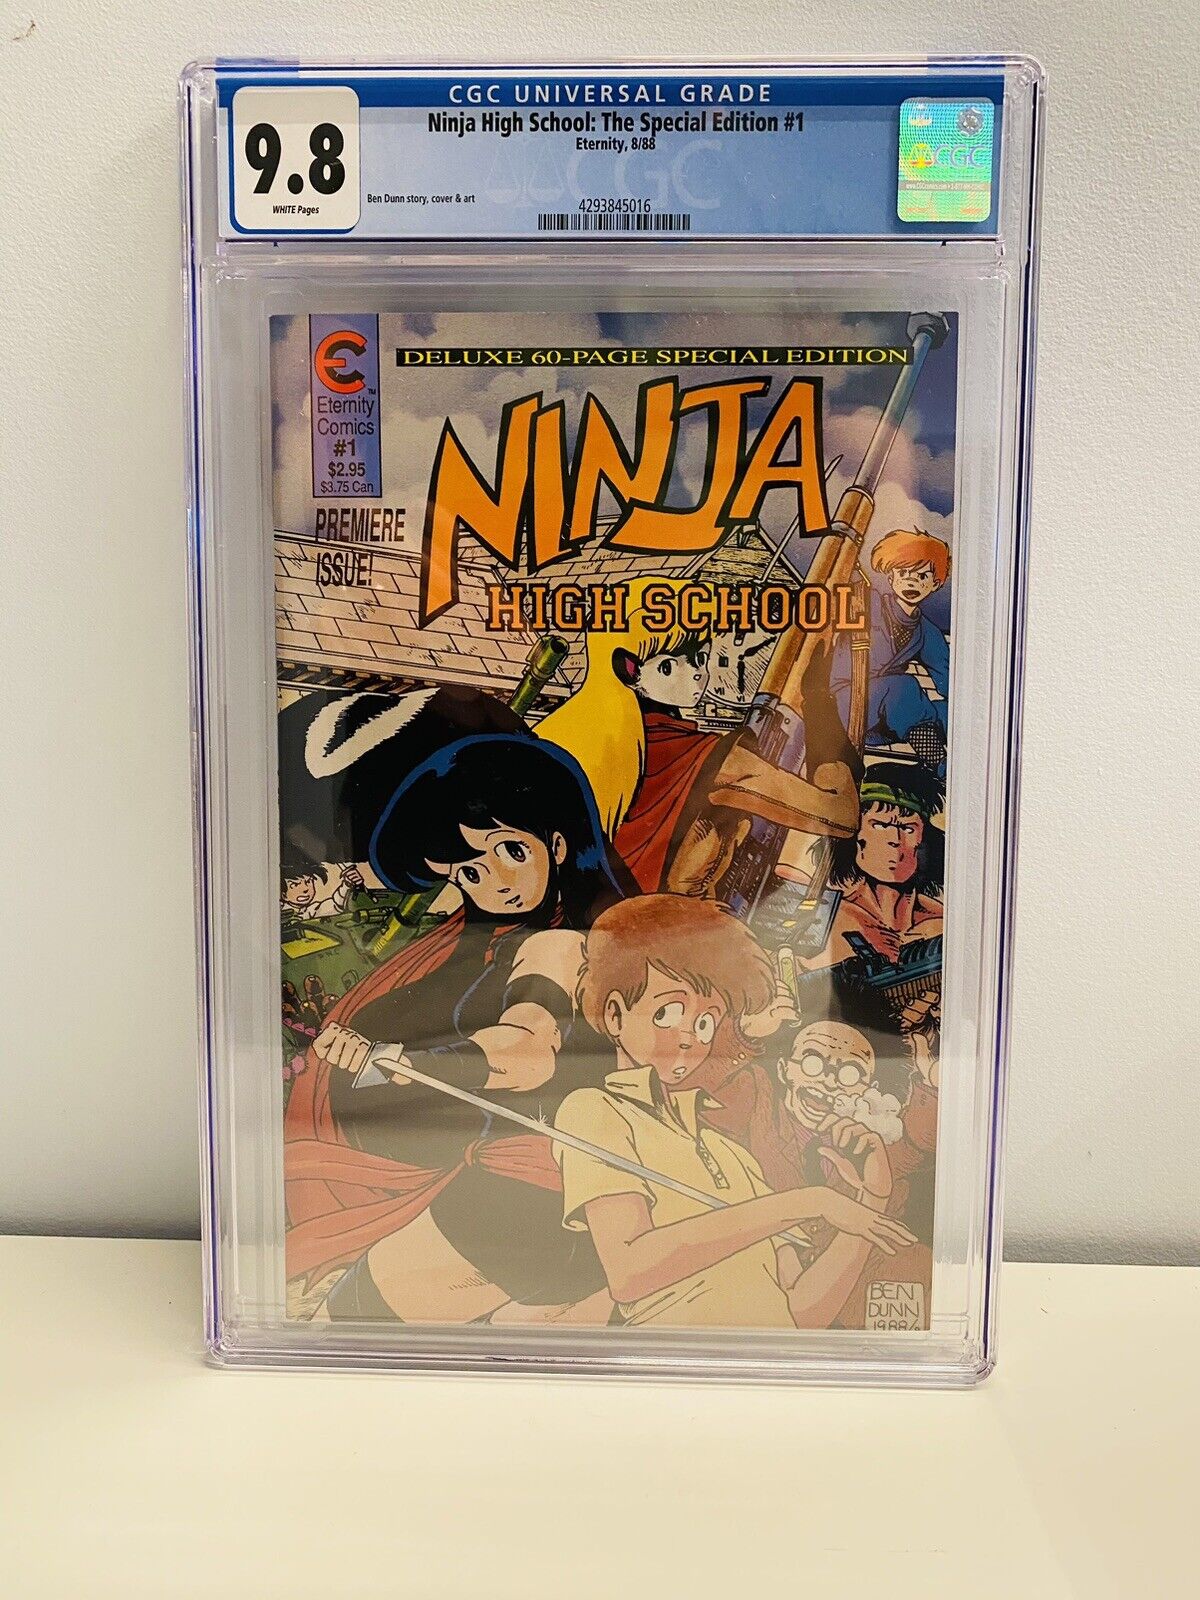 Ninja High School The Special Edition #1 1988 CGC 9.8 White Pages 1st print